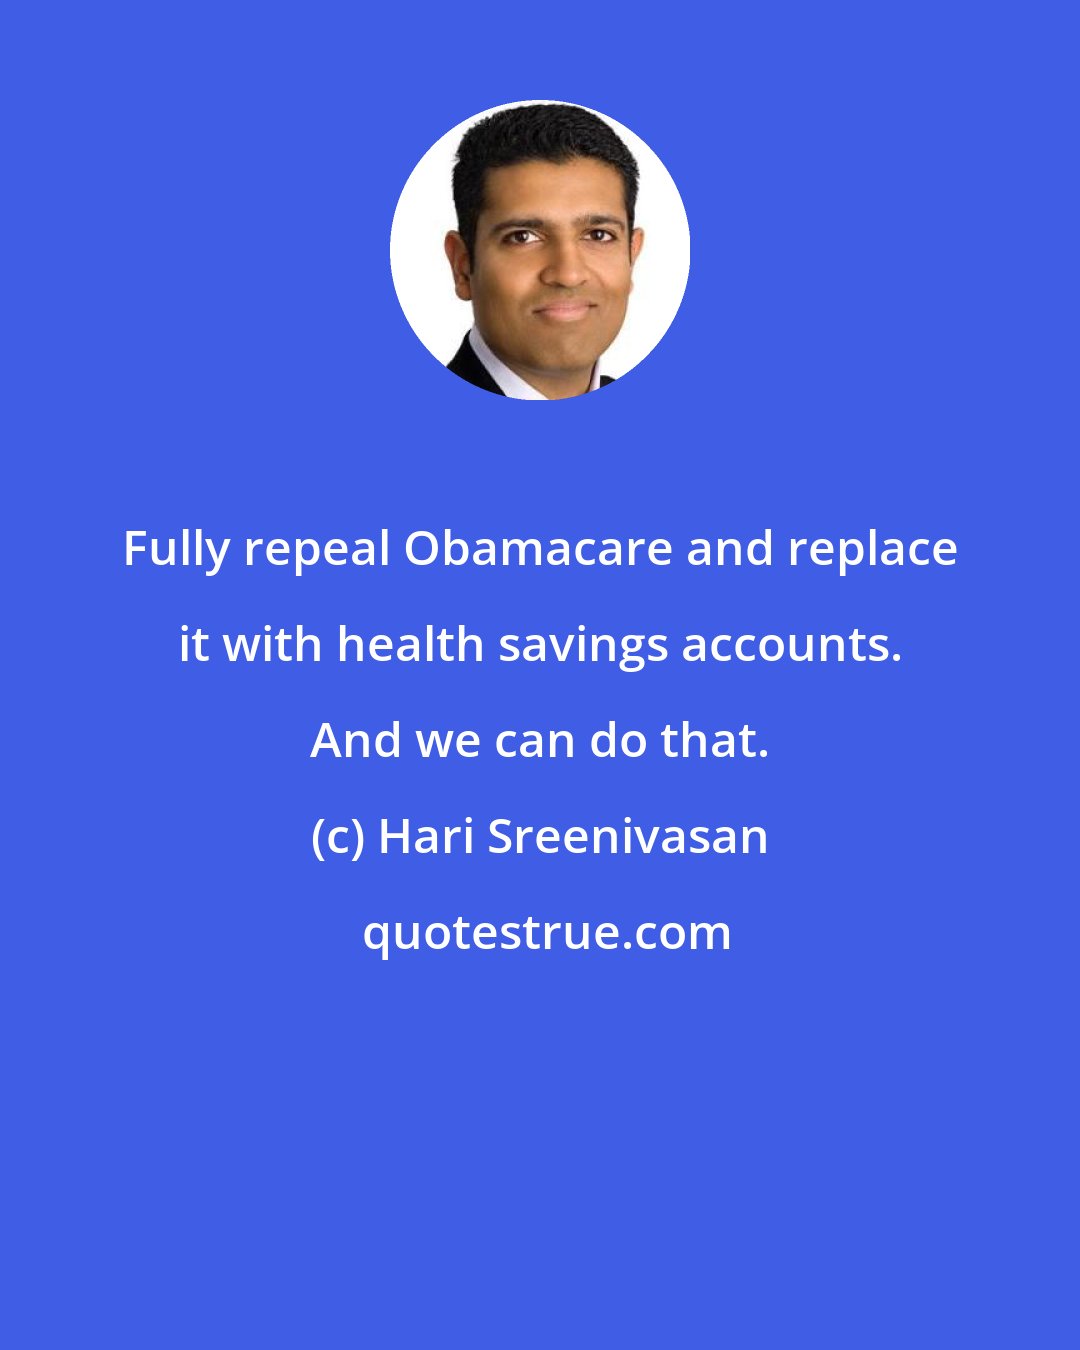 Hari Sreenivasan: Fully repeal Obamacare and replace it with health savings accounts. And we can do that.